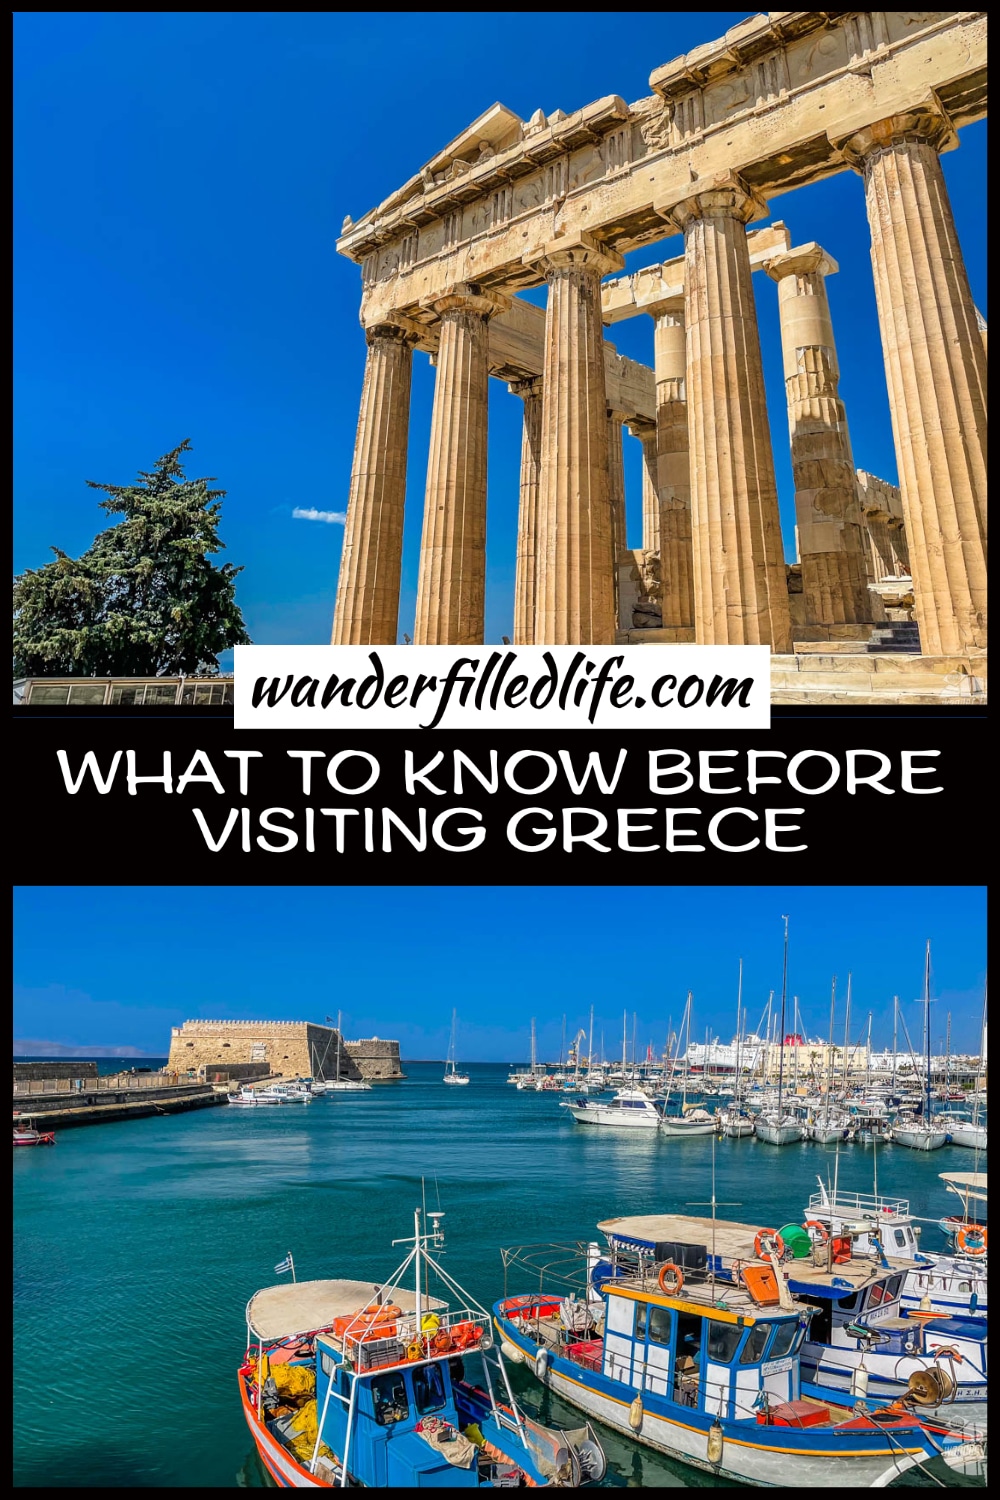 Visiting Greece is truly an exceptional experience but there are some important things to know before you arrive in this wonderful country.